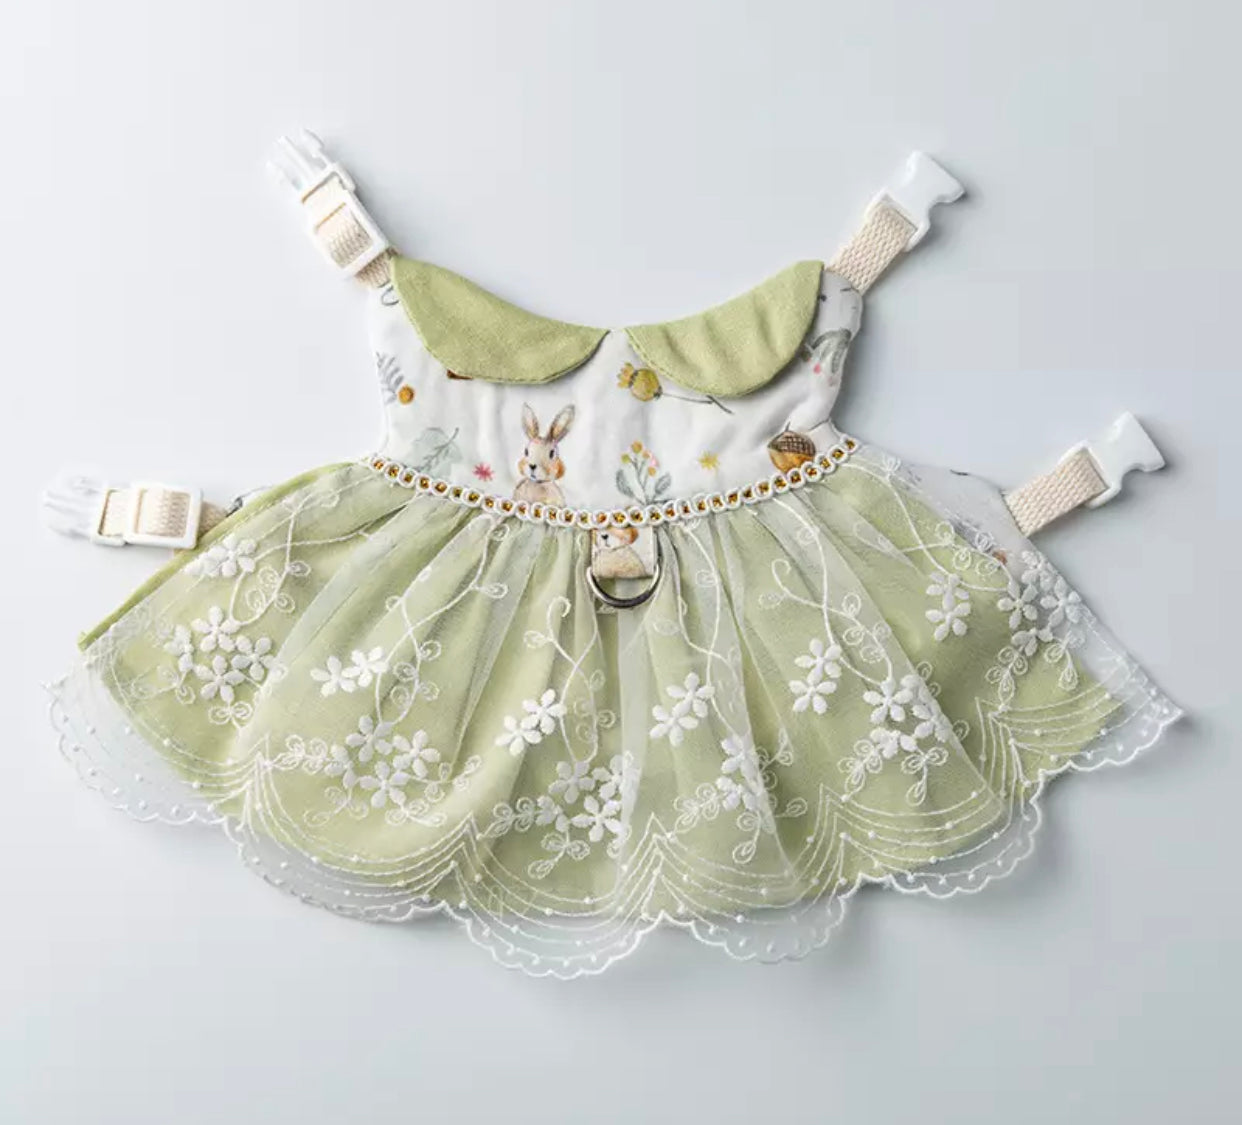 High quality harness (dress with lace)